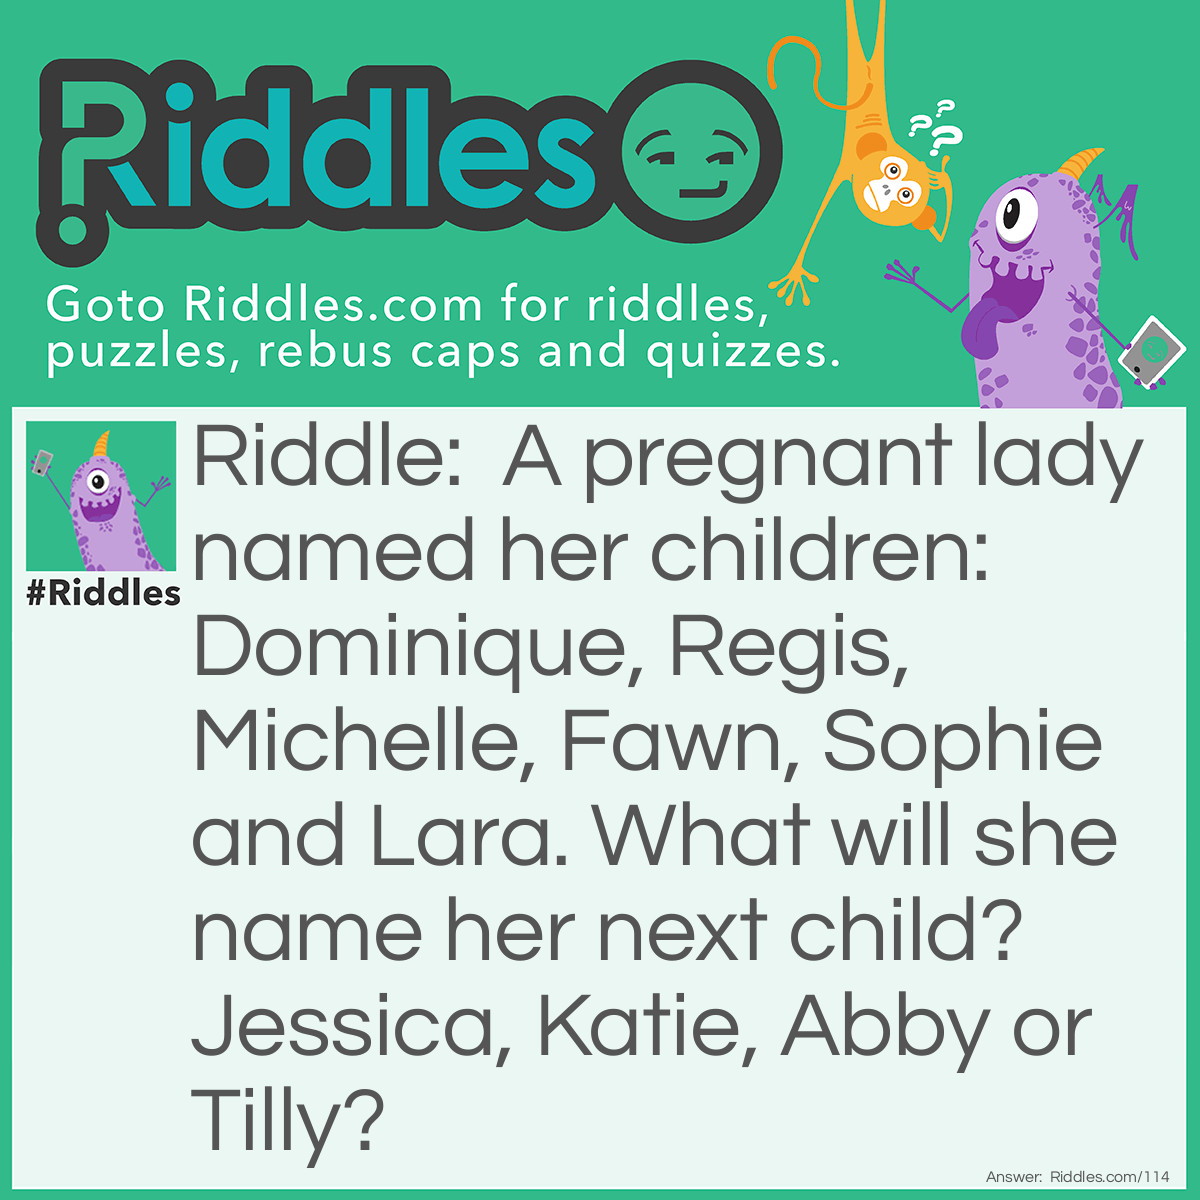 Riddle: A pregnant lady named her <a href="/riddles-for-kids">children</a>: Dominique, Regis, Michelle, Fawn, Sophie, and Lara. What will she name her next child? Jessica, Katie, Abby, or Tilly? Answer: Tilly. She seems to follow the scale Do, Re, Me, Fa, So, La, and then Ti.